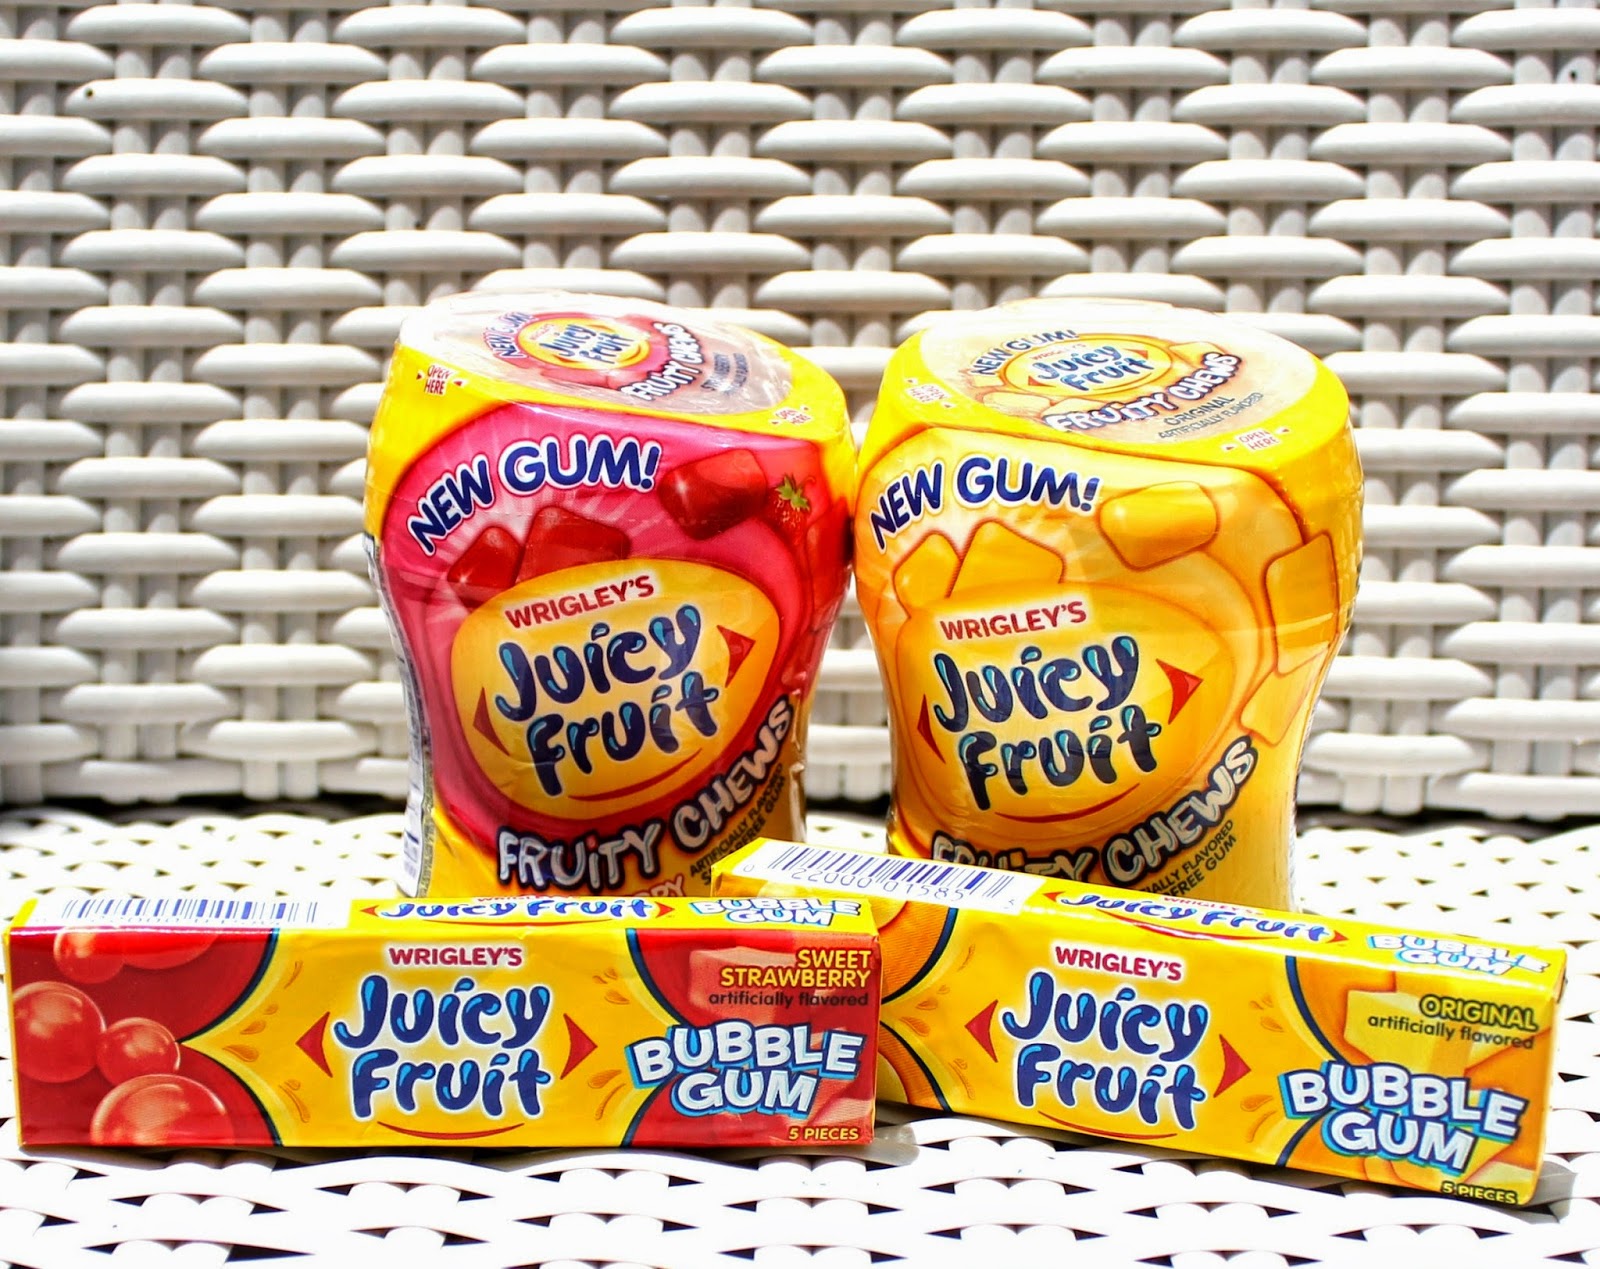 Show your fun side this summer with Juicy Fruit #JuicyFruitFunSide #CollectiveBias